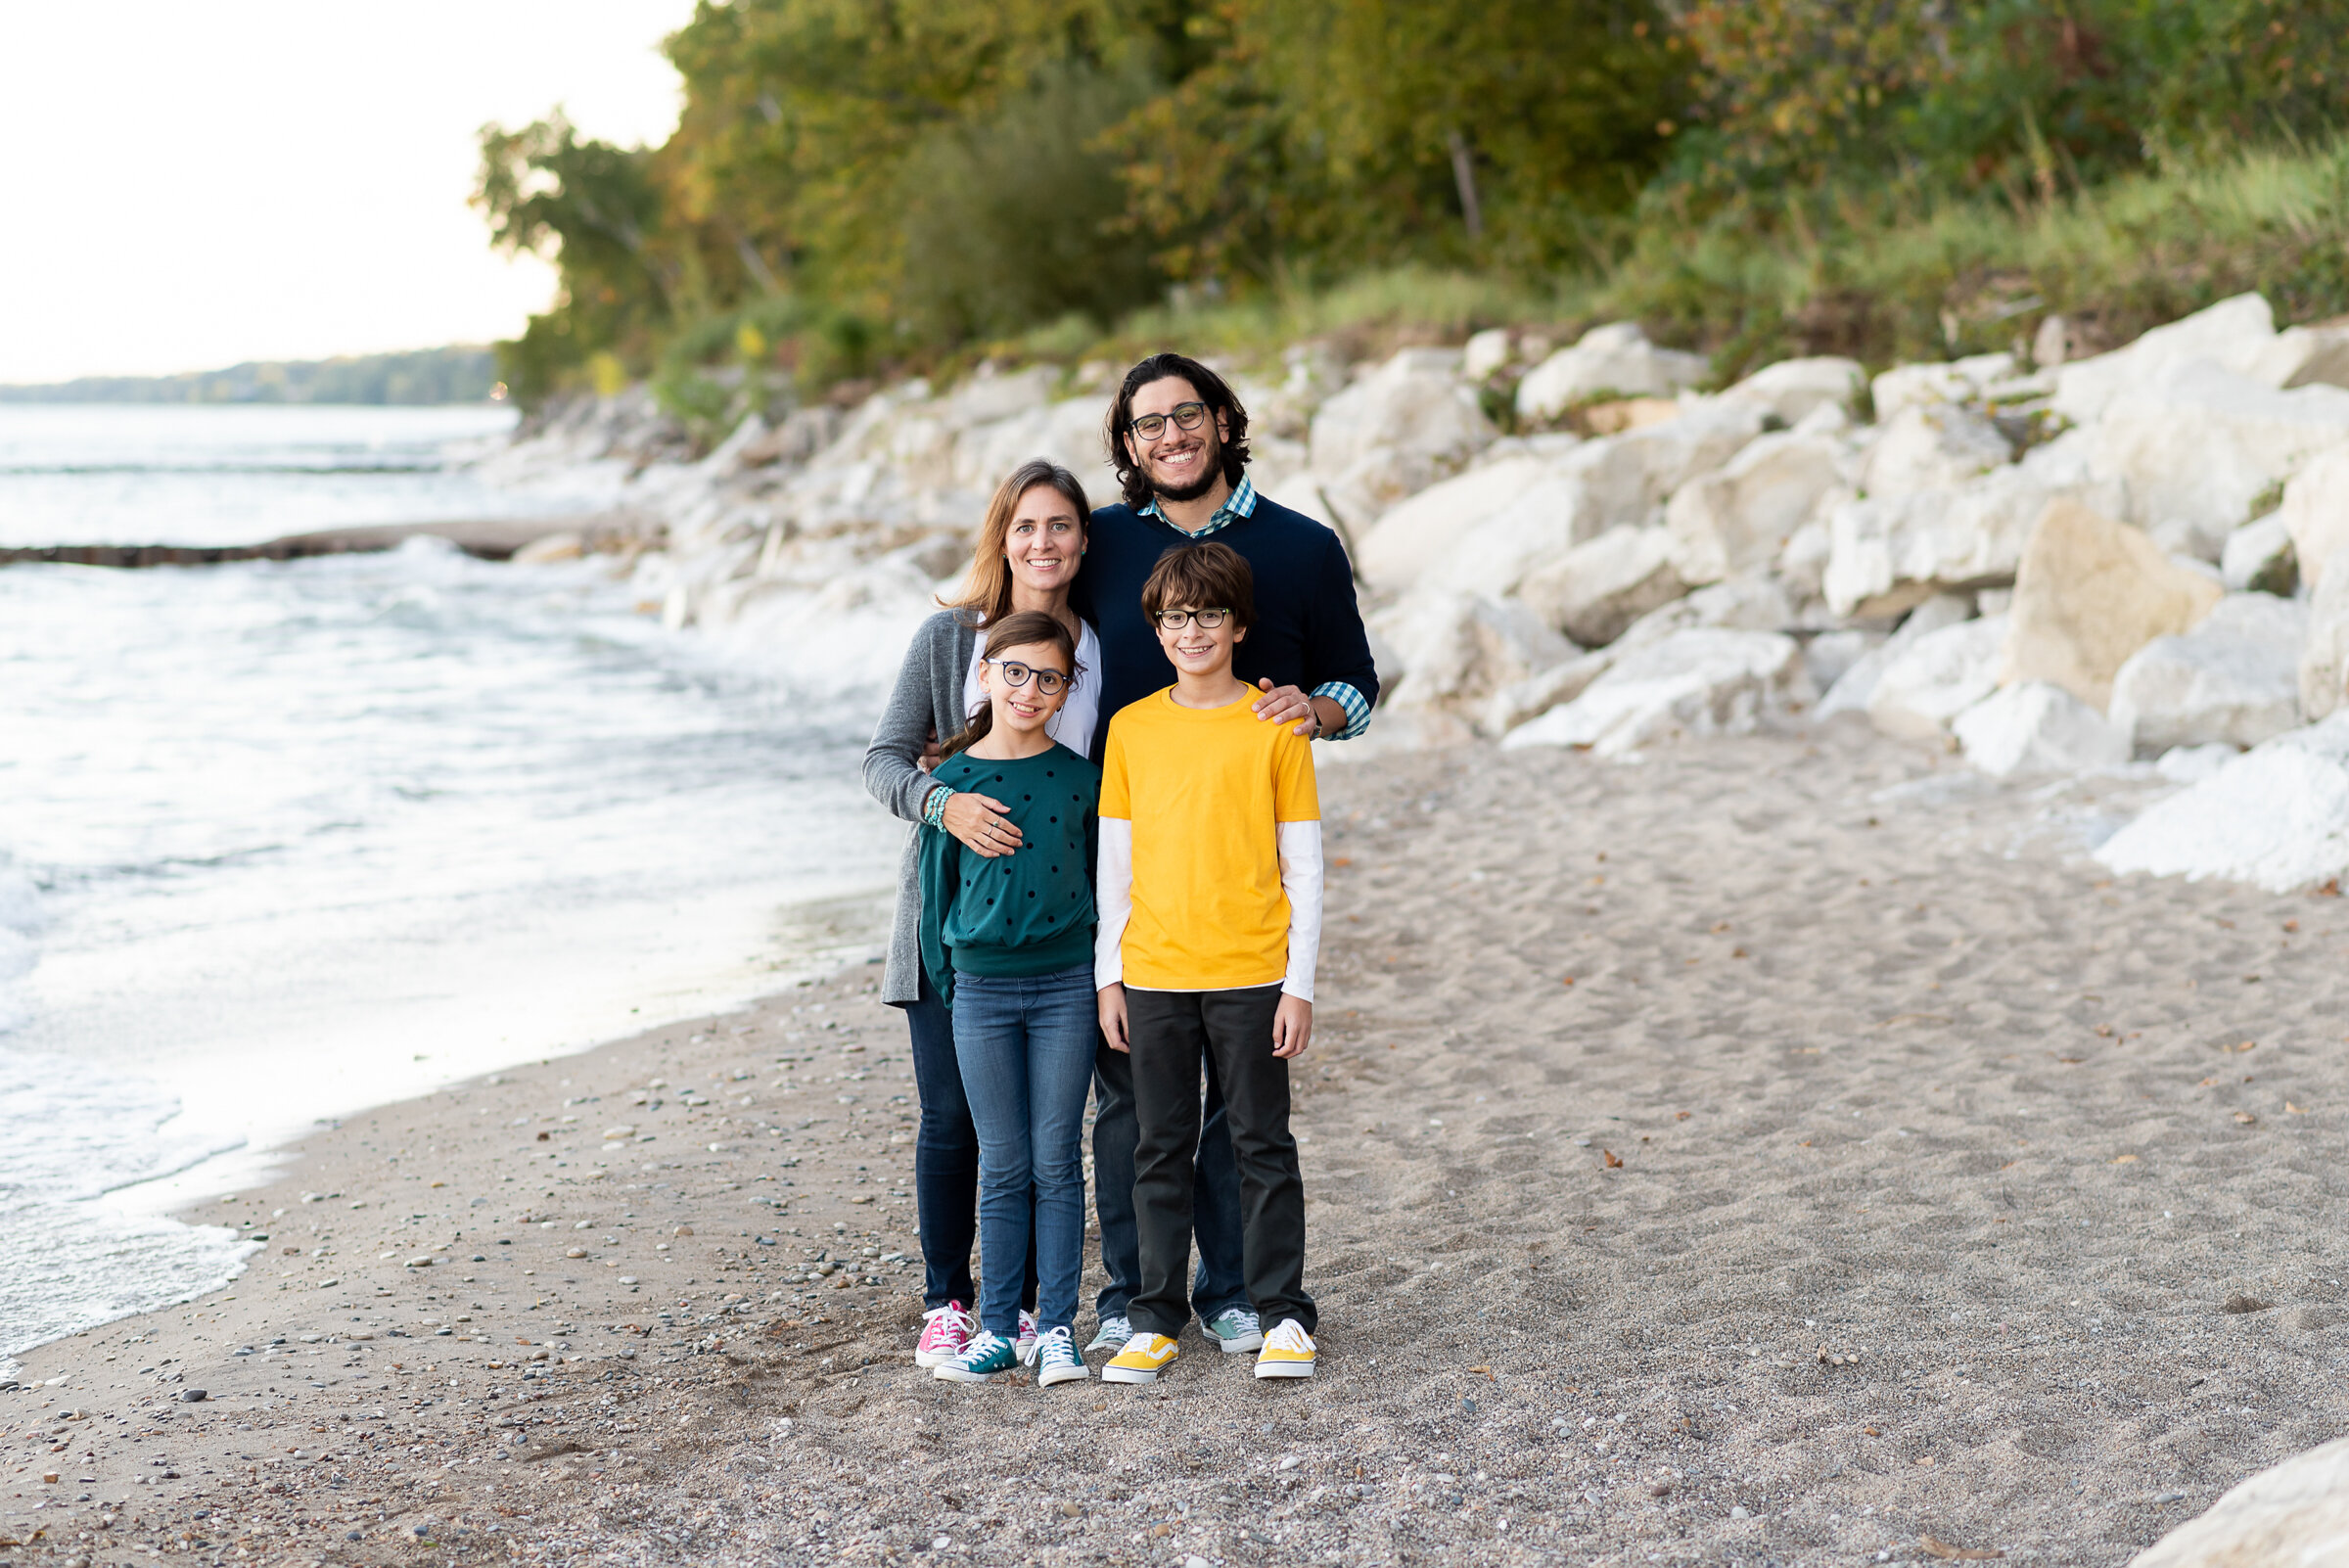 Lake Forest Family Photographer, Lake Forest Family Photography, Lake Forest Family Session, Fort Sheridan Family Photographer, Chicago Family Photographer (52 of 69).jpg